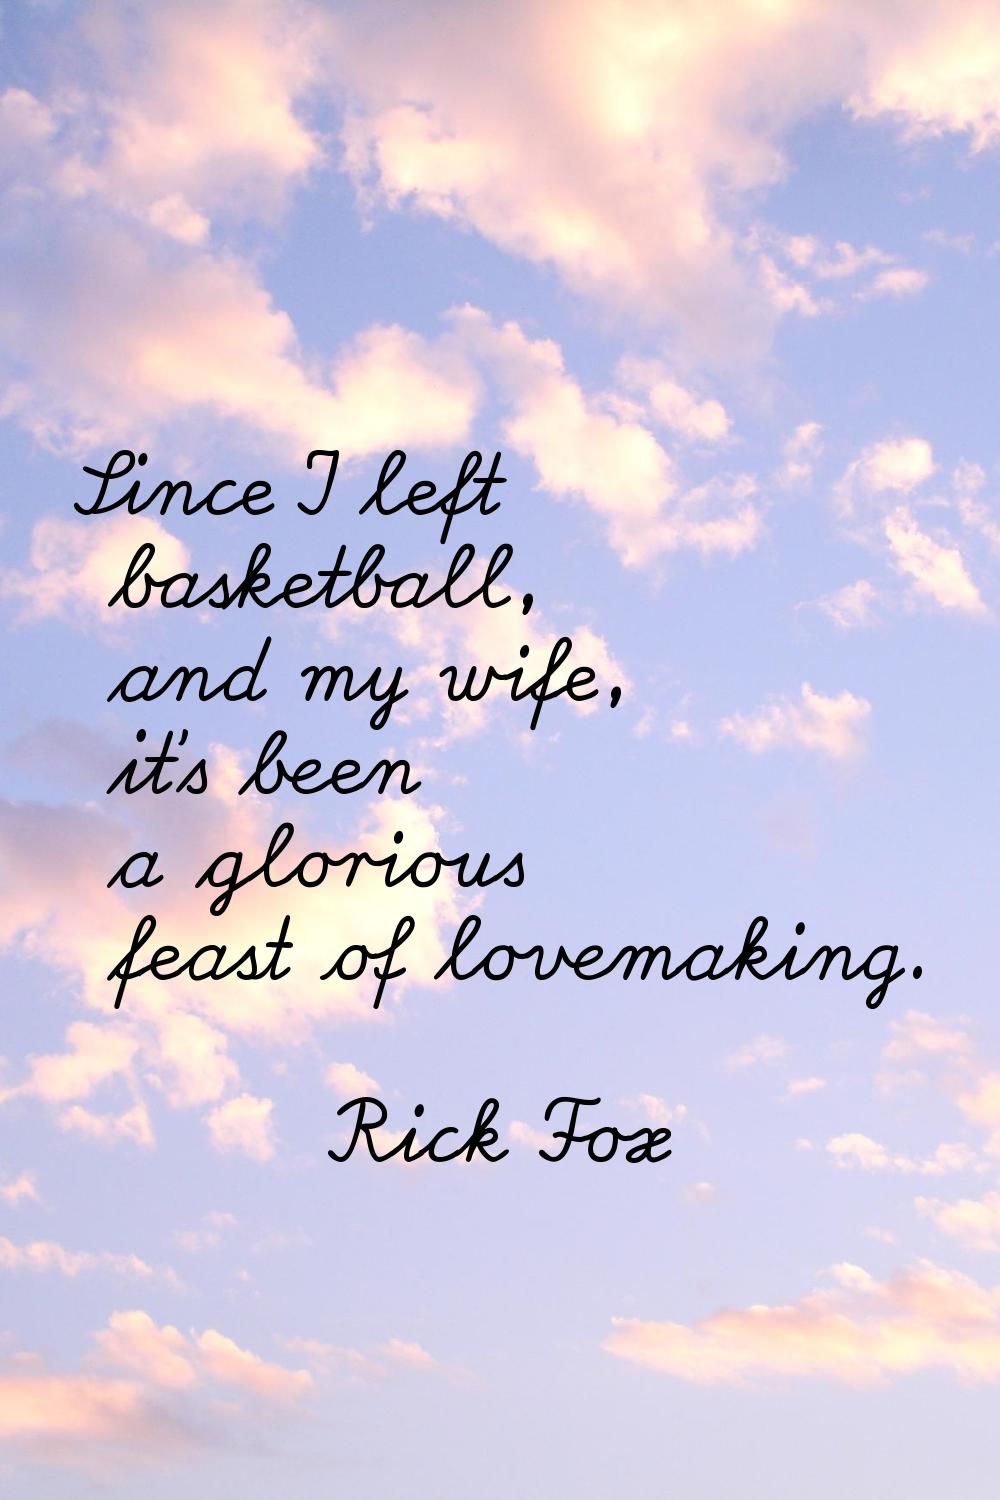 Since I left basketball, and my wife, it's been a glorious feast of lovemaking.